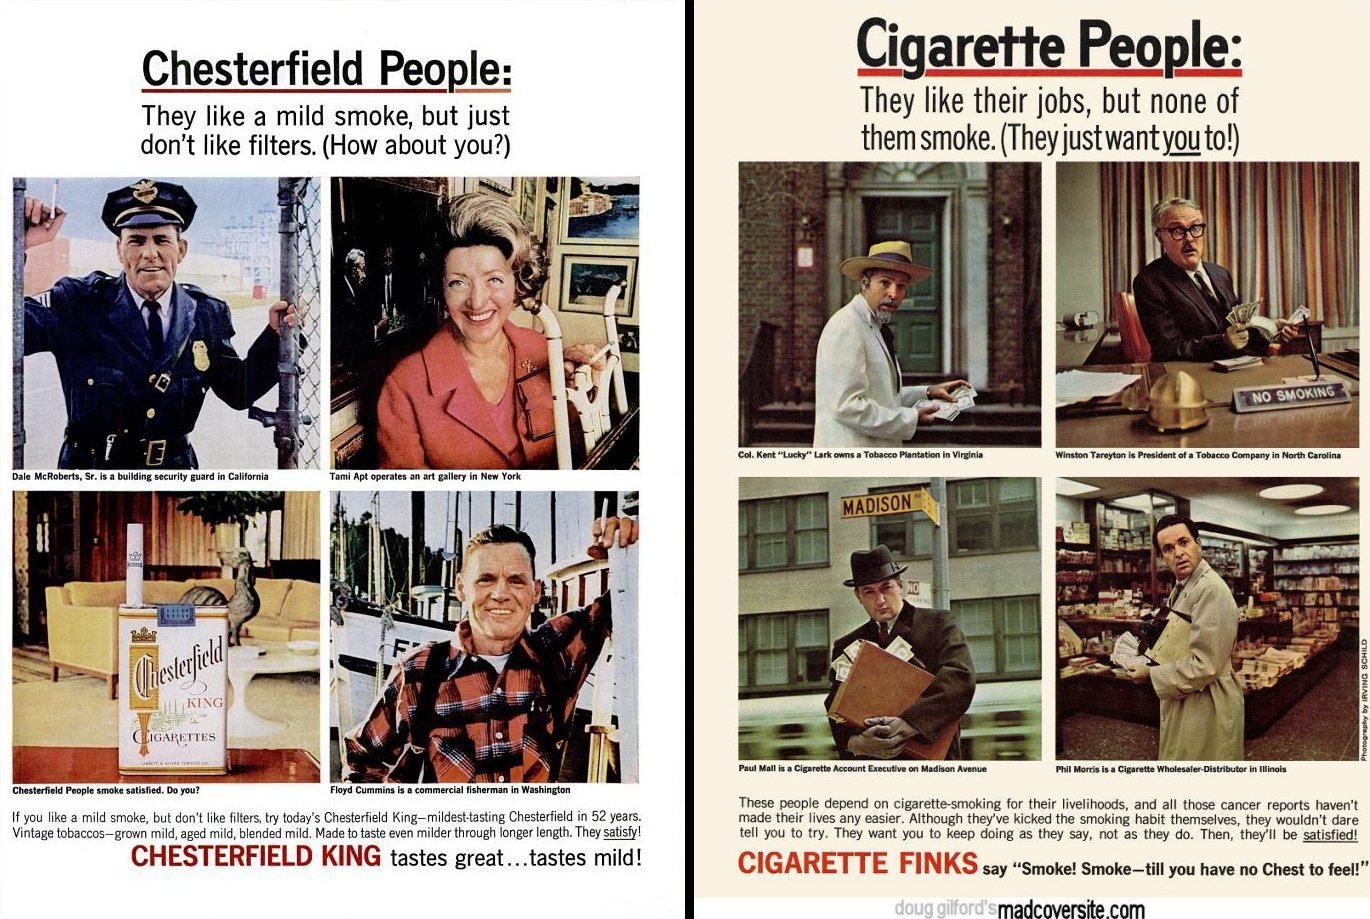 Chesterfield King Cigarettes